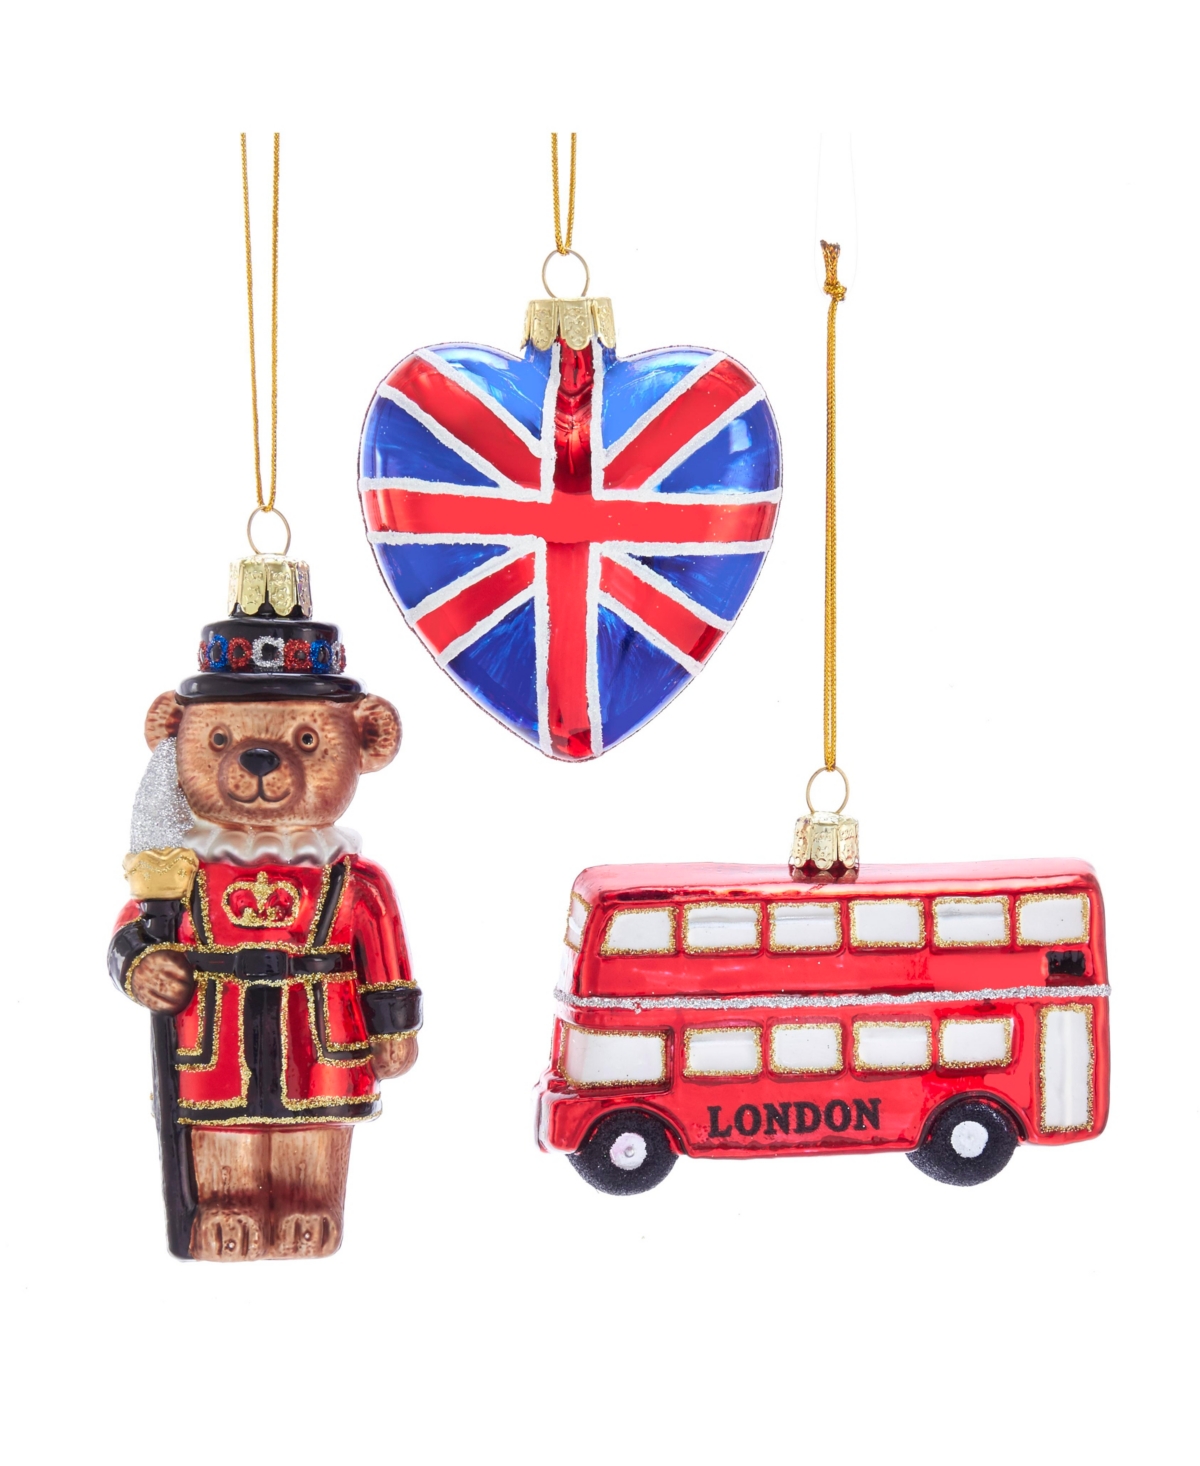 Kurt Adler 4.5-inch Britain Inspired Glass Ornaments, Set Of 3 In Multicolored